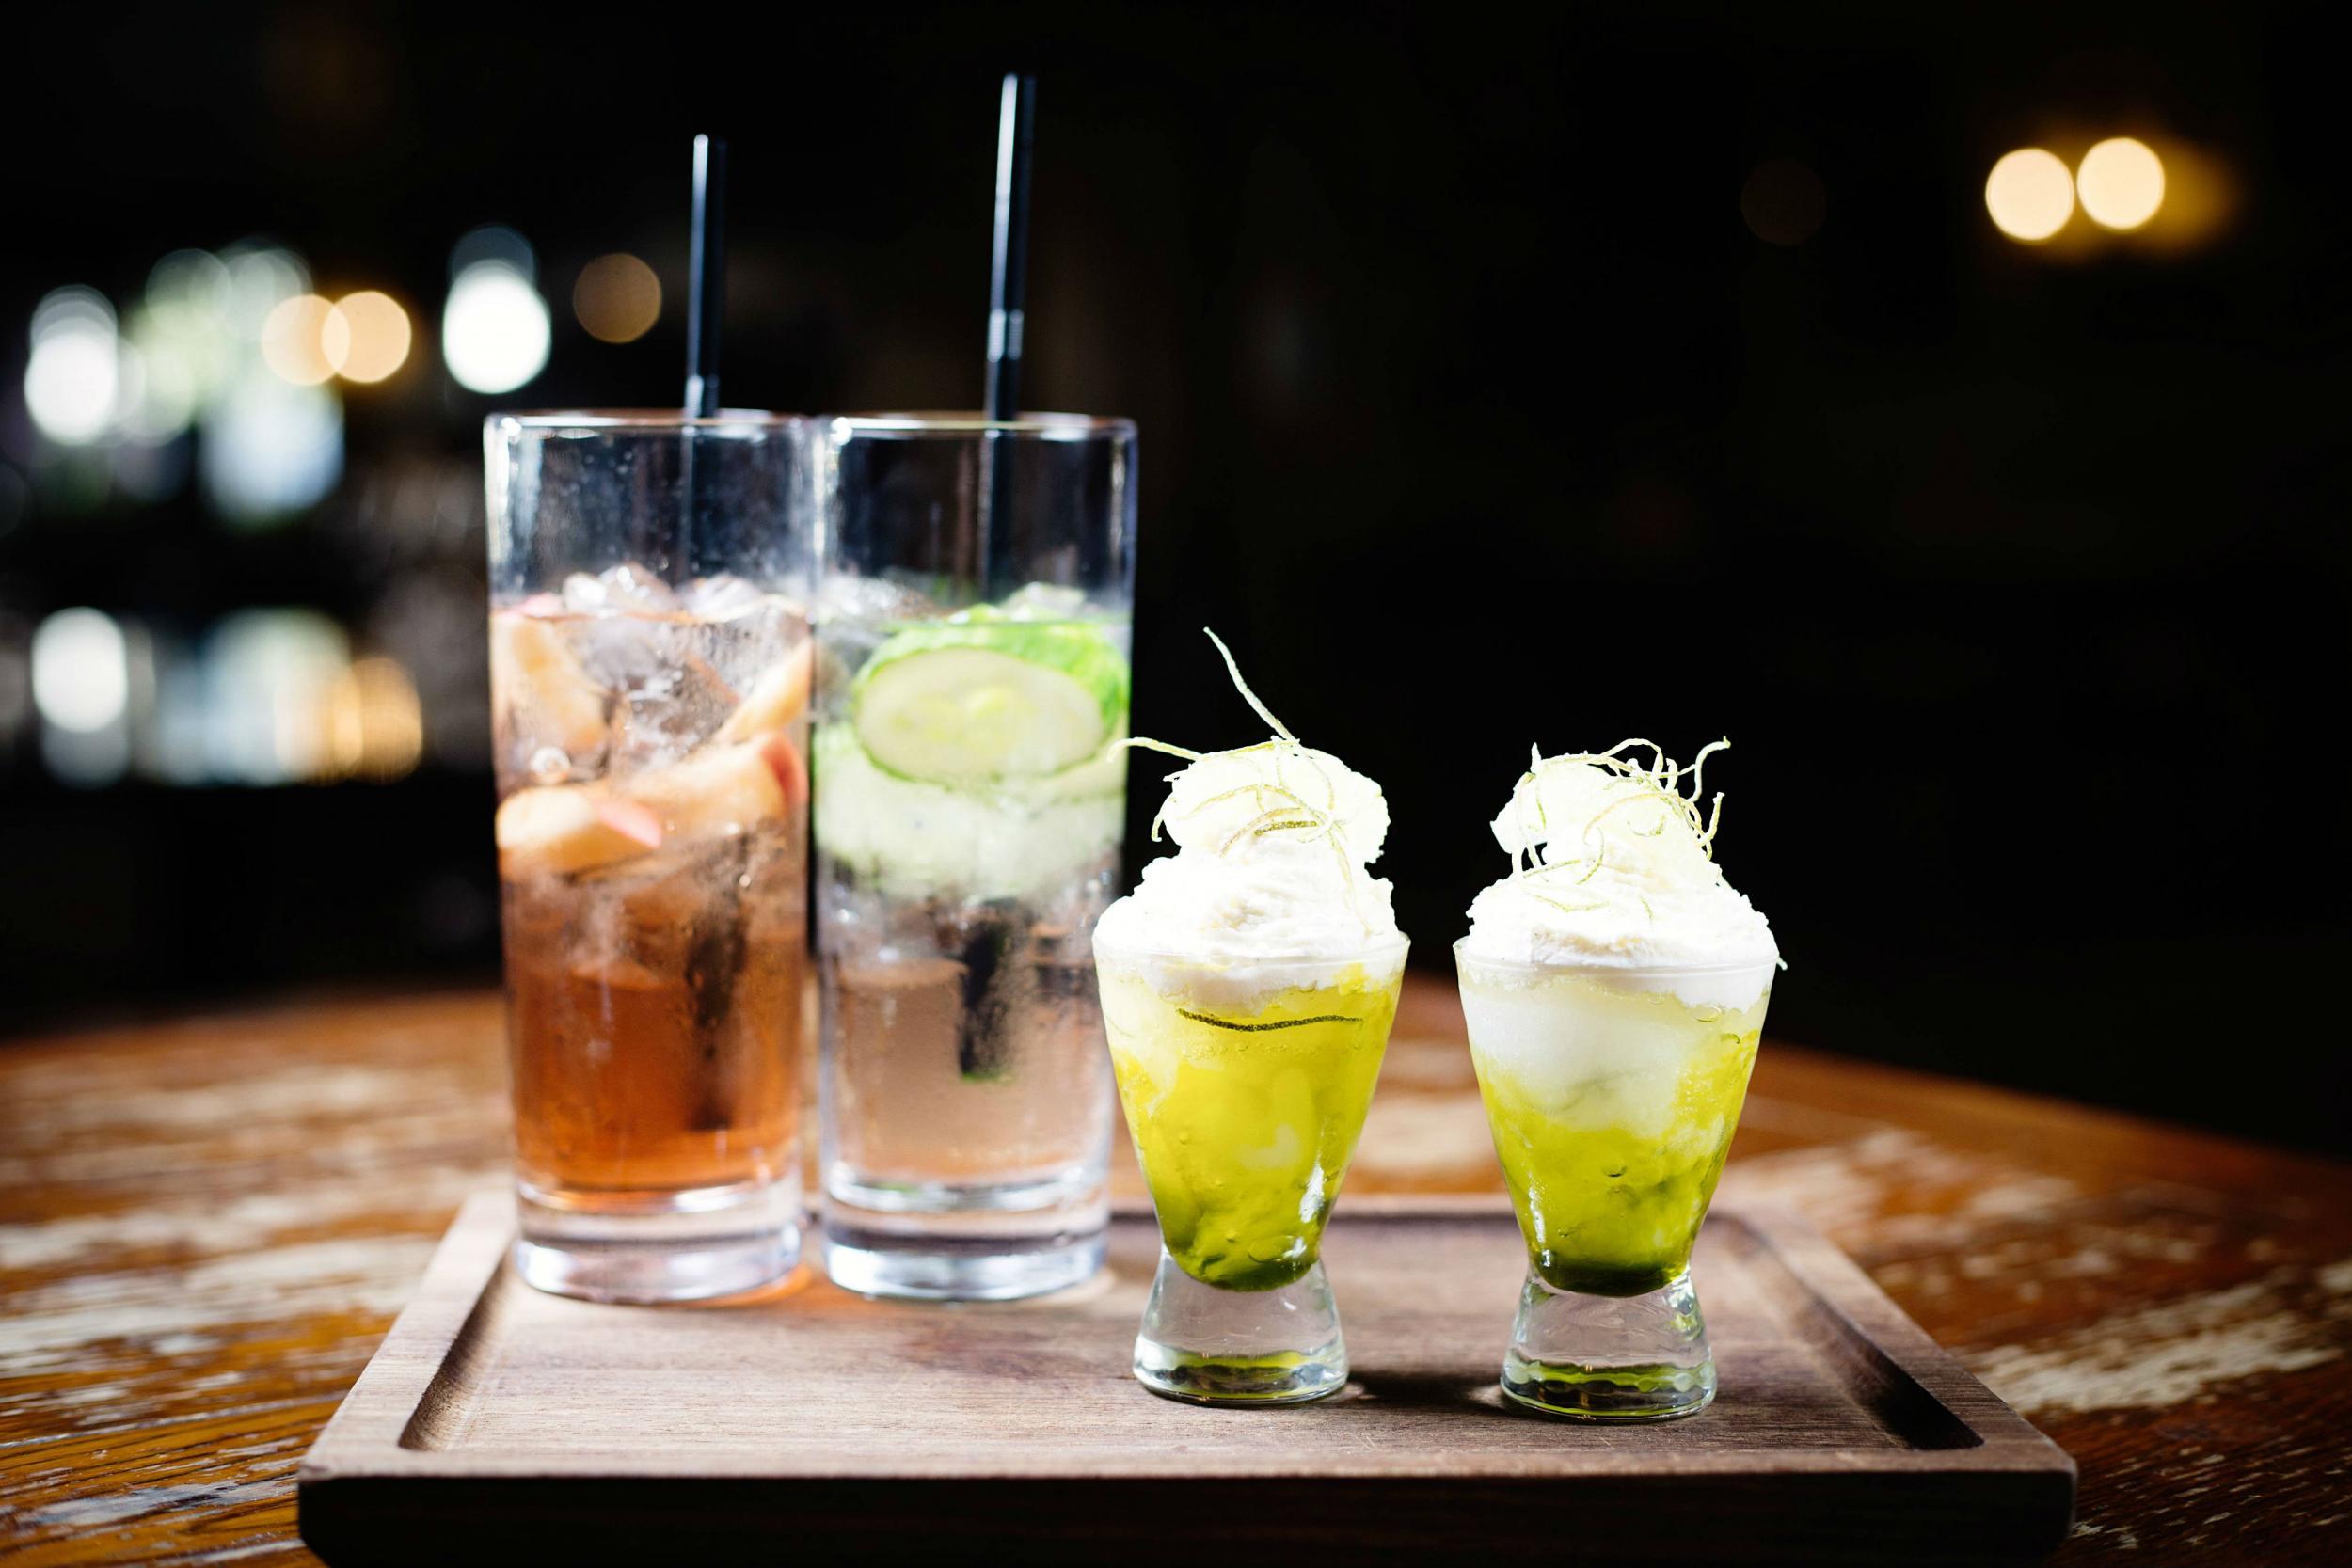 A selection of gin mixers and the gin &amp; tonic knickerbocker glorys (Hotel du Vin)